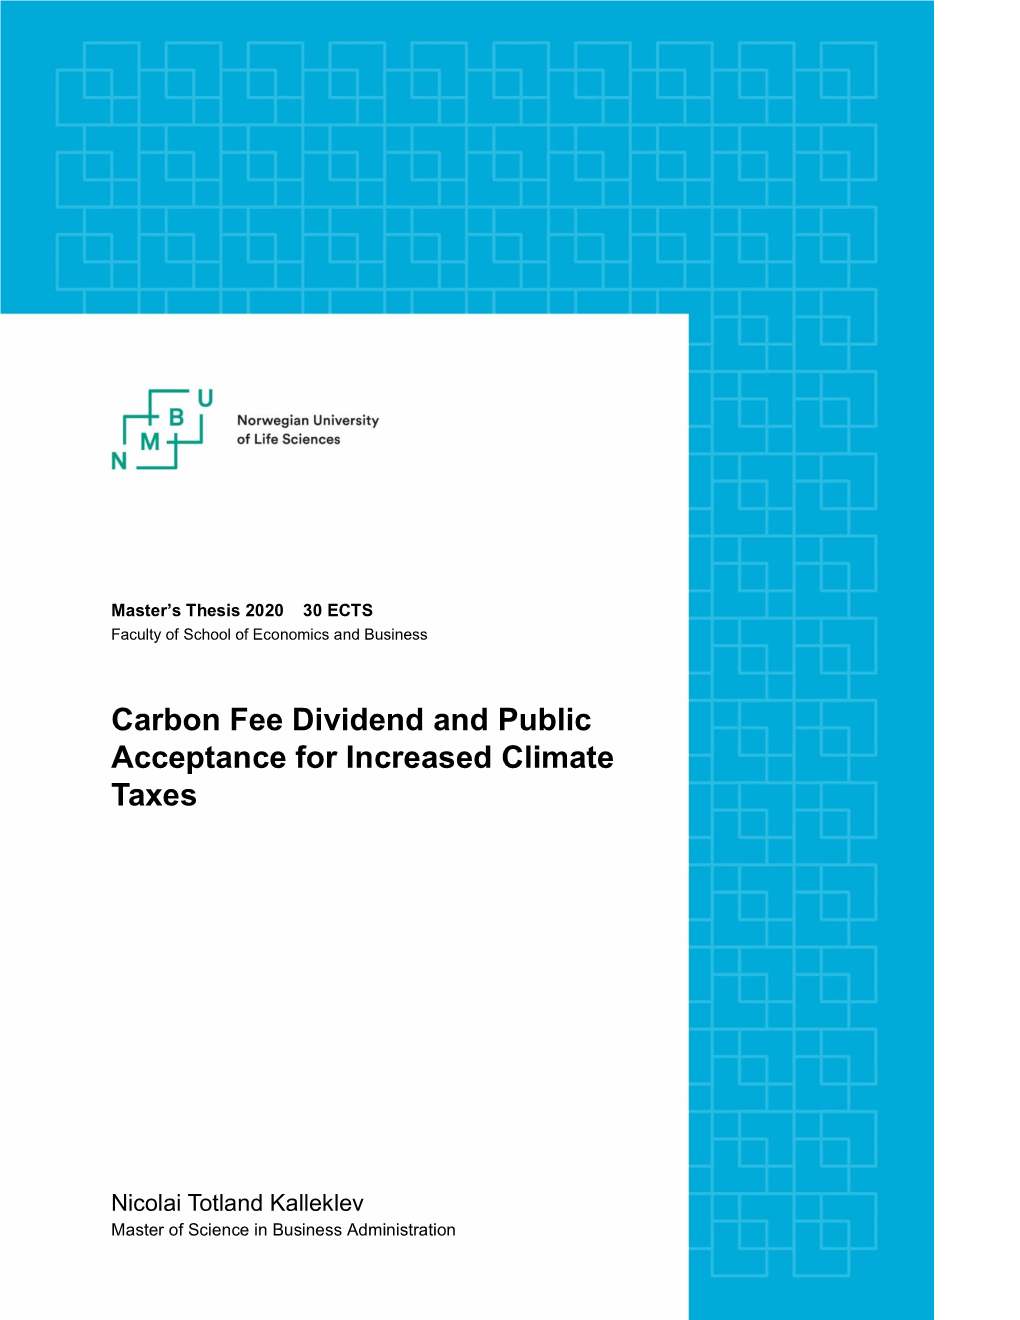 Carbon Fee Dividend and Public Acceptance for Increased Climate Taxes